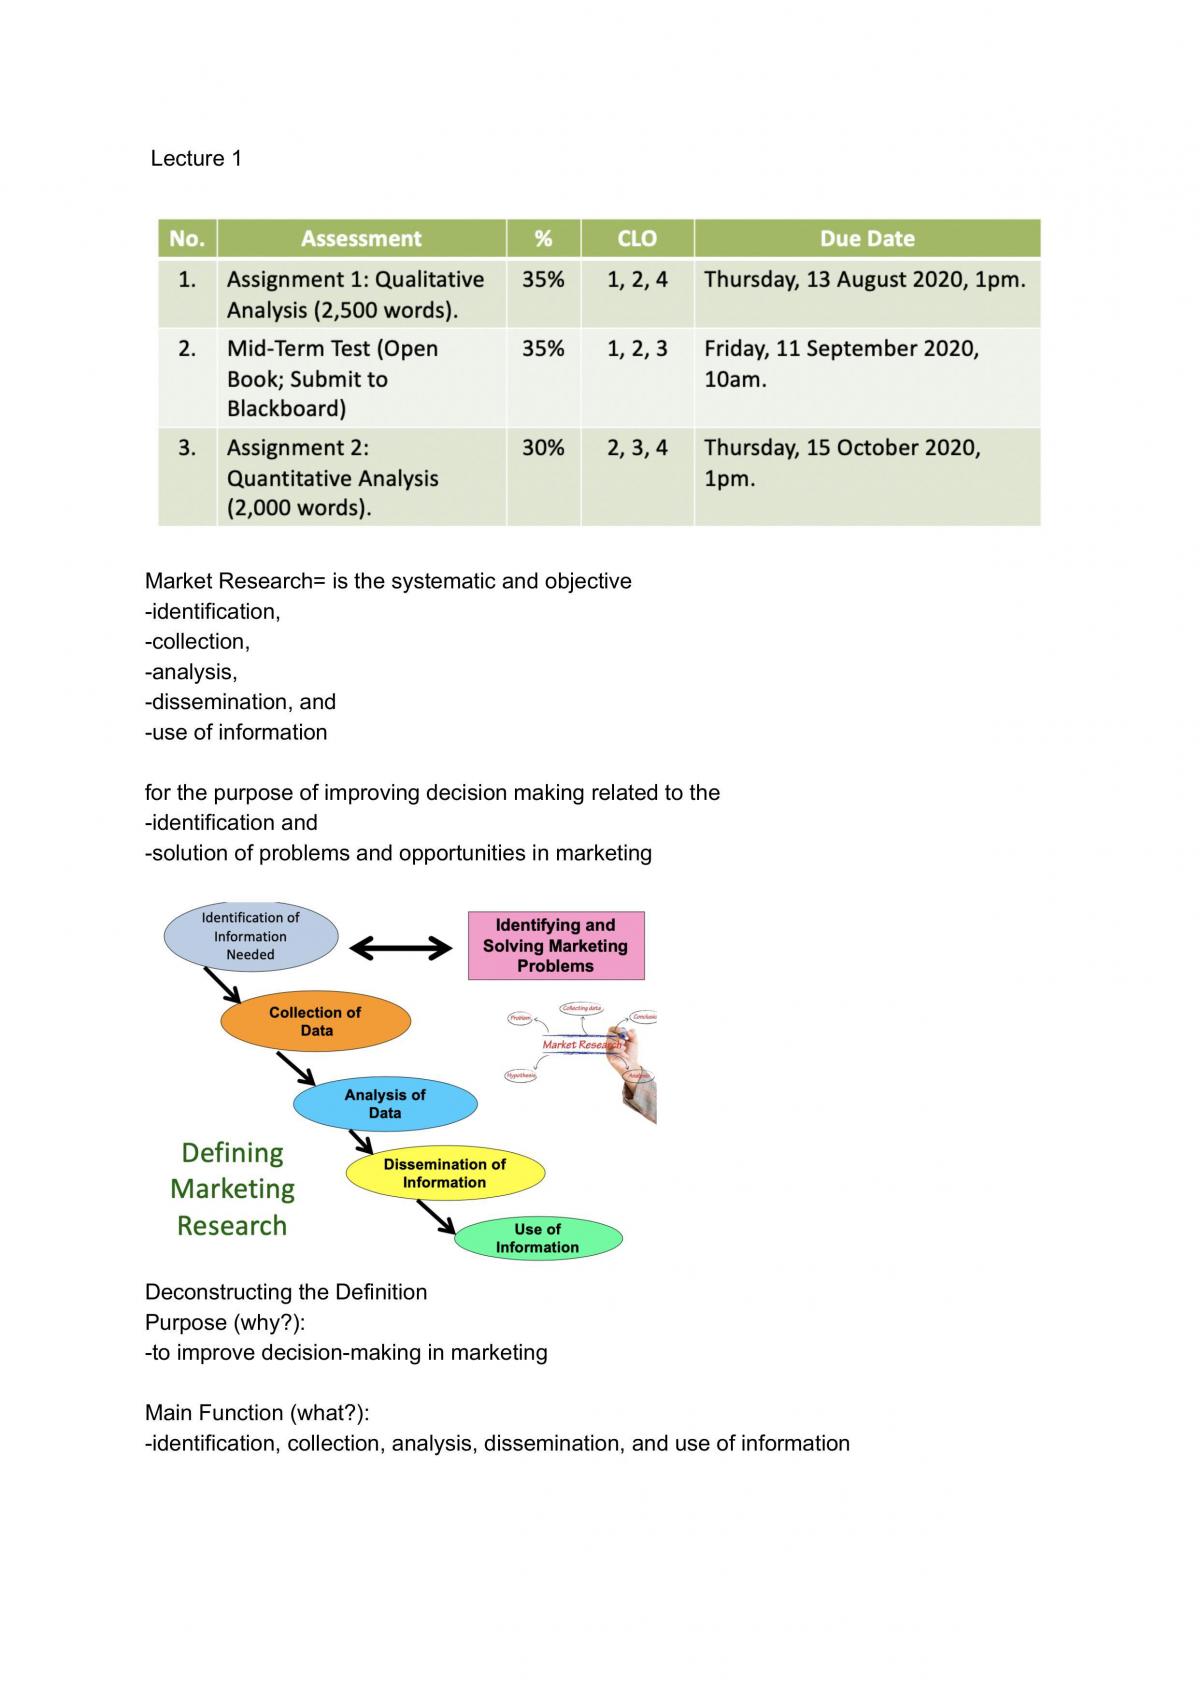 market research lecture notes pdf